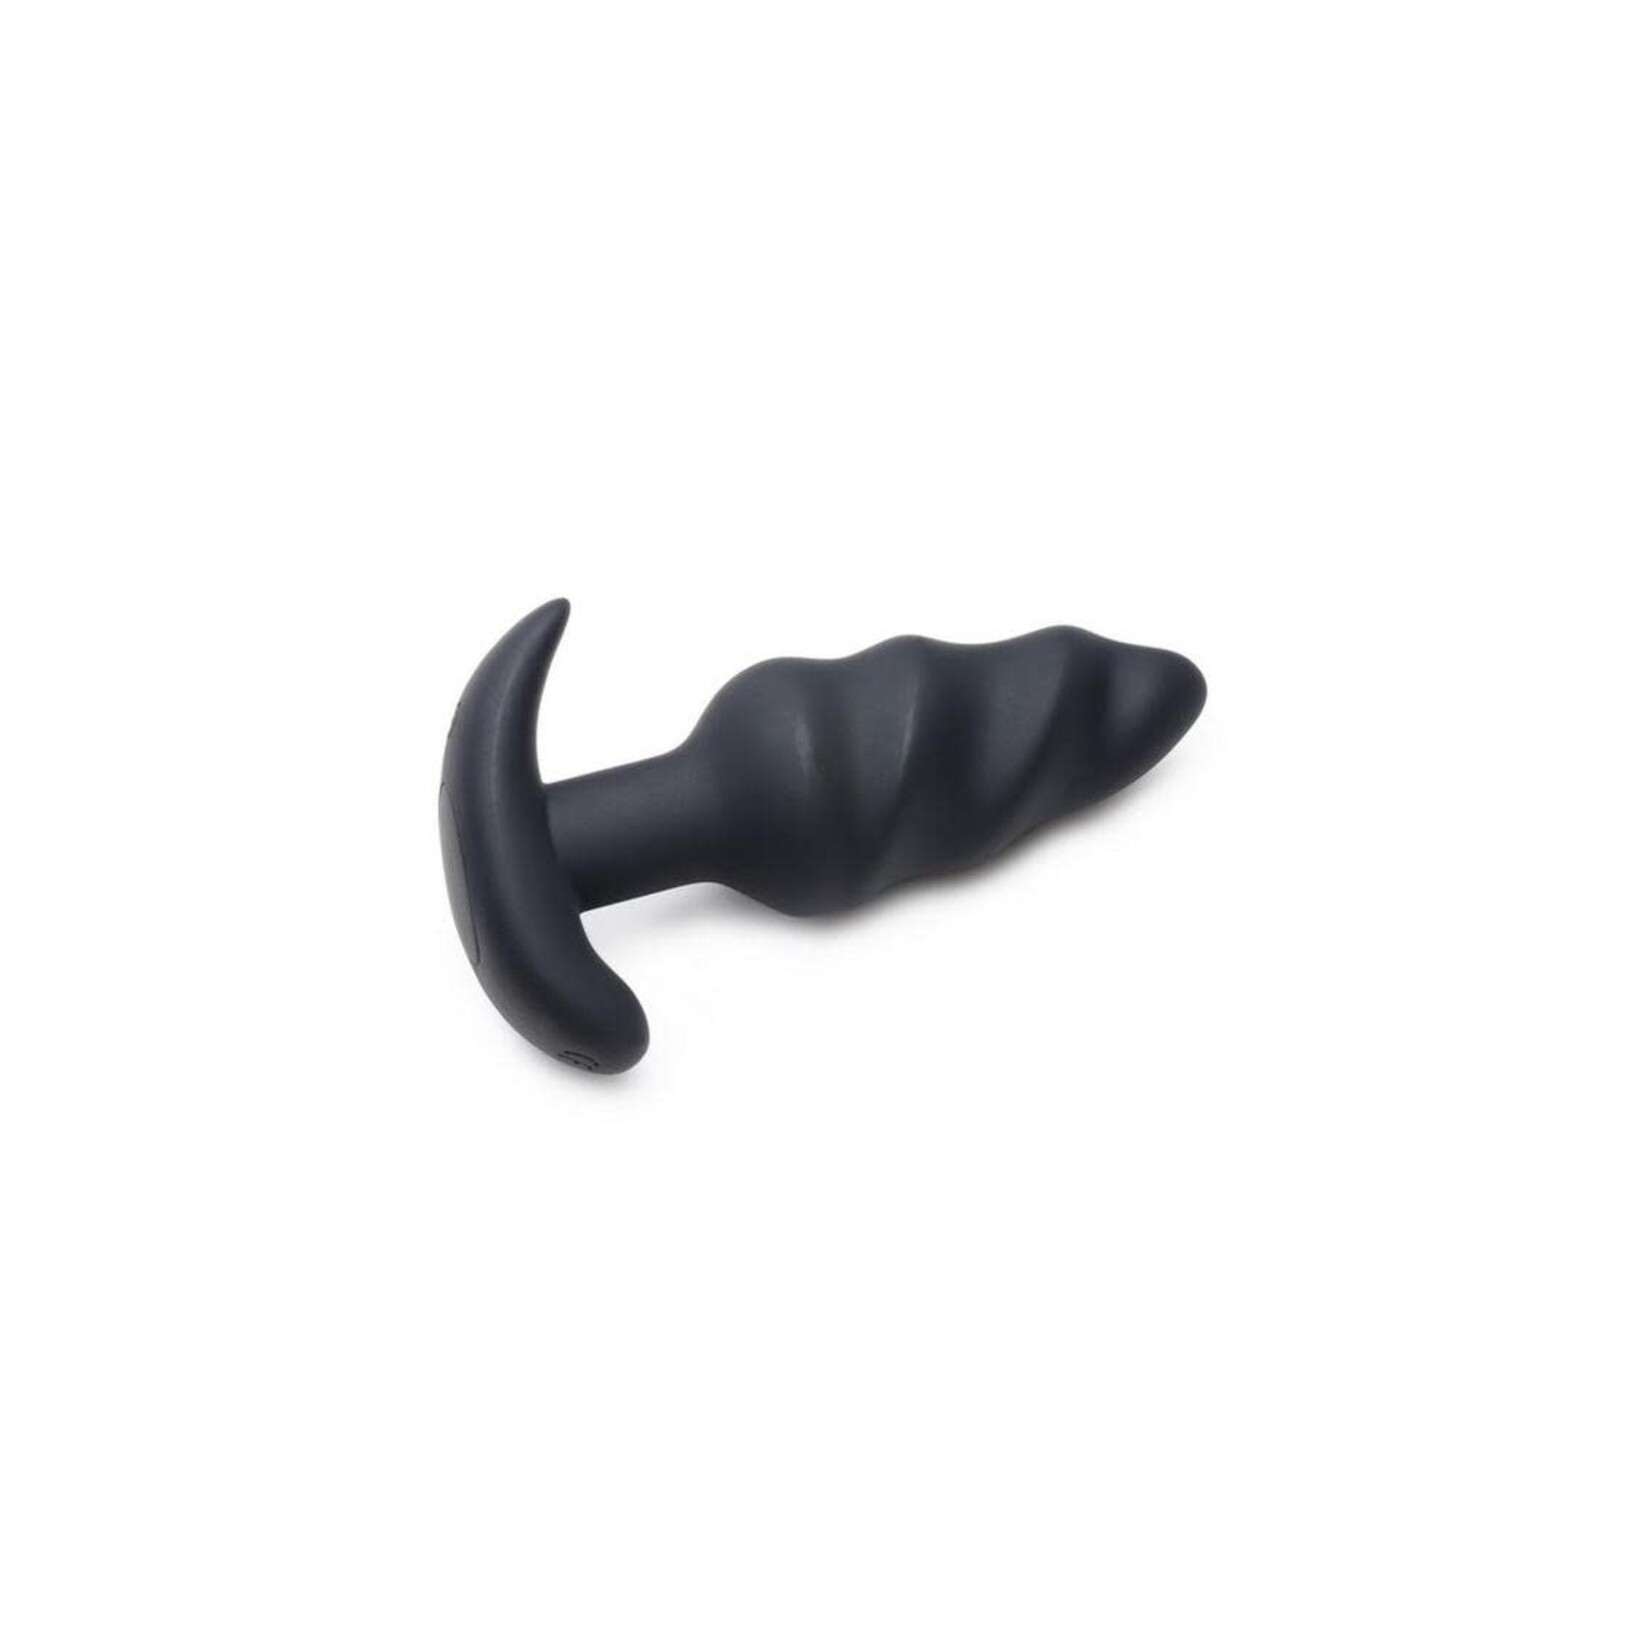 Bang! 21x Vibrating Silicone Rechargeable Swirl Butt Plug With Remote Control - Black